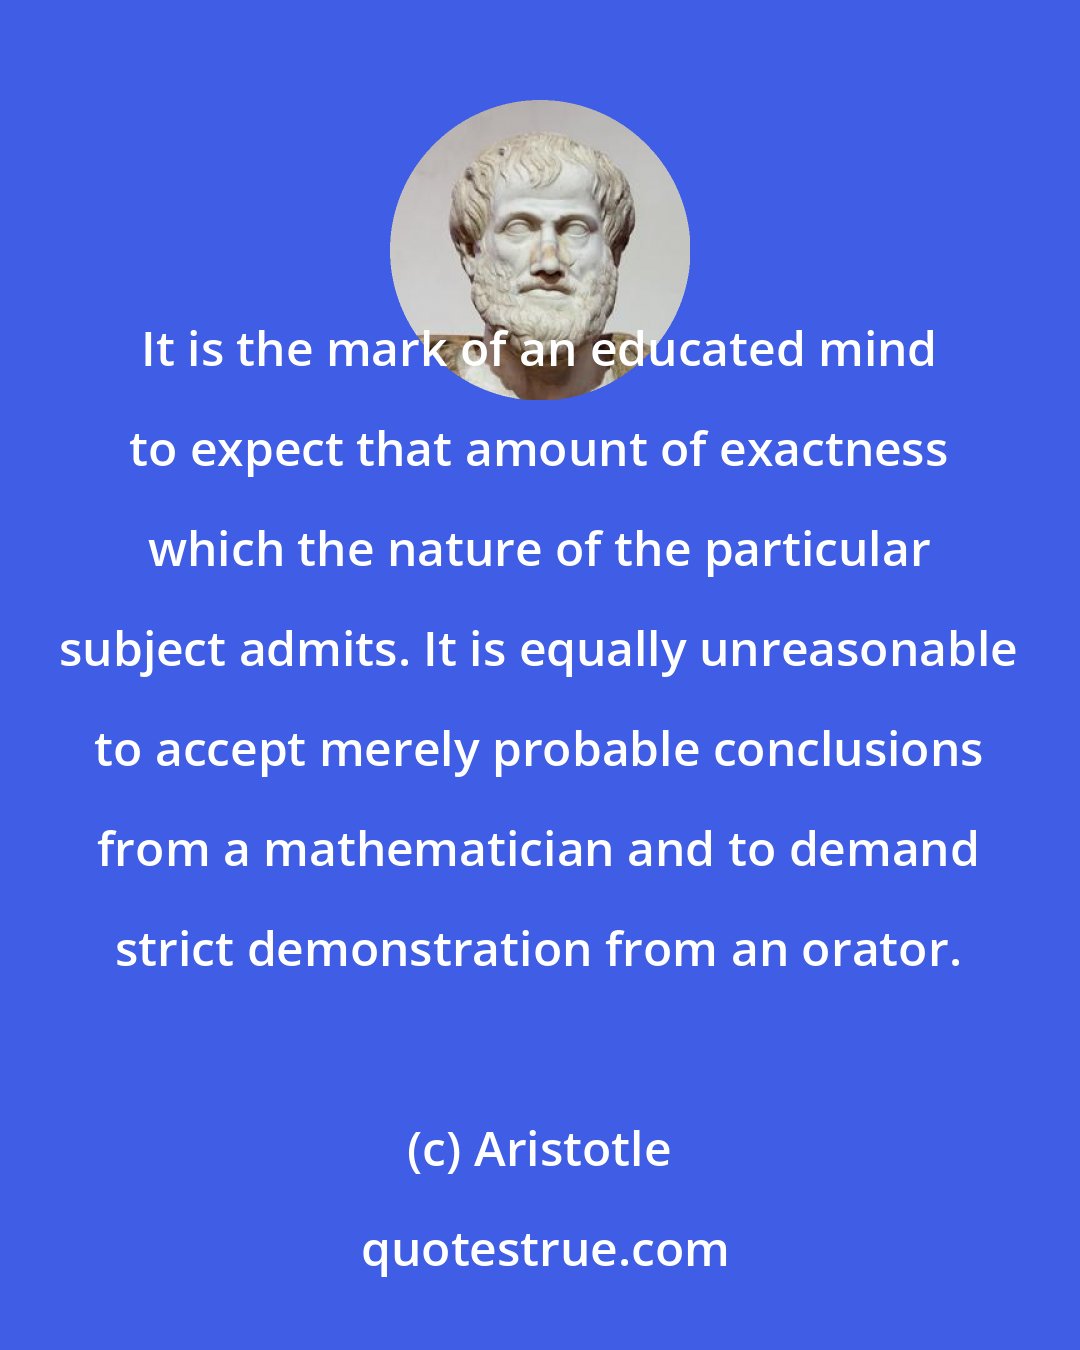 Aristotle: It is the mark of an educated mind to expect that amount of exactness which the nature of the particular subject admits. It is equally unreasonable to accept merely probable conclusions from a mathematician and to demand strict demonstration from an orator.